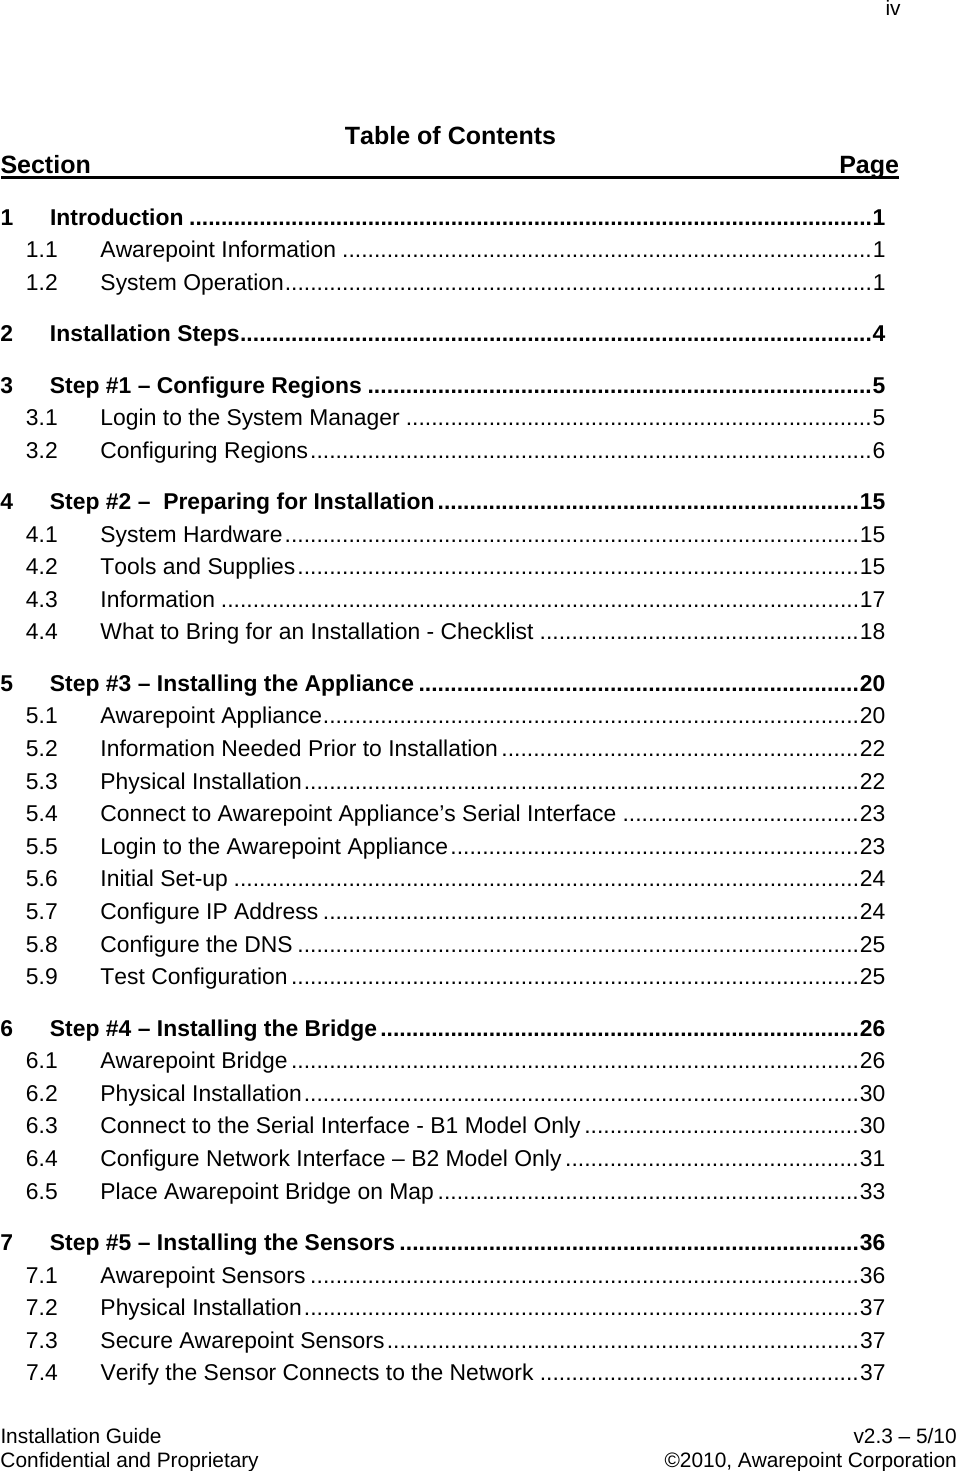 iv  Installation Guide    v2.3 – 5/10 Confidential and Proprietary    ©2010, Awarepoint Corporation   Table of Contents 1 Introduction ........................................................................................................... 1Section Page  1.1 Awarepoint Information ................................................................................... 1 1.2 System Operation ............................................................................................ 1 2 Installation Steps ................................................................................................... 4 3 Step #1 – Configure Regions ............................................................................... 5 3.1 Login to the System Manager ......................................................................... 5 3.2 Configuring Regions ........................................................................................ 6 4 Step #2 –  Preparing for Installation .................................................................. 15 4.1 System Hardware .......................................................................................... 15 4.2 Tools and Supplies ........................................................................................ 15 4.3 Information .................................................................................................... 17 4.4 What to Bring for an Installation - Checklist .................................................. 18 5 Step #3 – Installing the Appliance ..................................................................... 20 5.1 Awarepoint Appliance .................................................................................... 20 5.2 Information Needed Prior to Installation ........................................................ 22 5.3 Physical Installation ....................................................................................... 22 5.4 Connect to Awarepoint Appliance’s Serial Interface ..................................... 23 5.5 Login to the Awarepoint Appliance ................................................................ 23 5.6 Initial Set-up .................................................................................................. 24 5.7 Configure IP Address .................................................................................... 24 5.8 Configure the DNS ........................................................................................ 25 5.9 Test Configuration ......................................................................................... 25 6 Step #4 – Installing the Bridge ........................................................................... 26 6.1 Awarepoint Bridge ......................................................................................... 26 6.2 Physical Installation ....................................................................................... 30 6.3 Connect to the Serial Interface - B1 Model Only ........................................... 30 6.4 Configure Network Interface – B2 Model Only .............................................. 31 6.5 Place Awarepoint Bridge on Map .................................................................. 33 7 Step #5 – Installing the Sensors ........................................................................ 36 7.1 Awarepoint Sensors ...................................................................................... 36 7.2 Physical Installation ....................................................................................... 37 7.3 Secure Awarepoint Sensors .......................................................................... 37 7.4 Verify the Sensor Connects to the Network .................................................. 37 